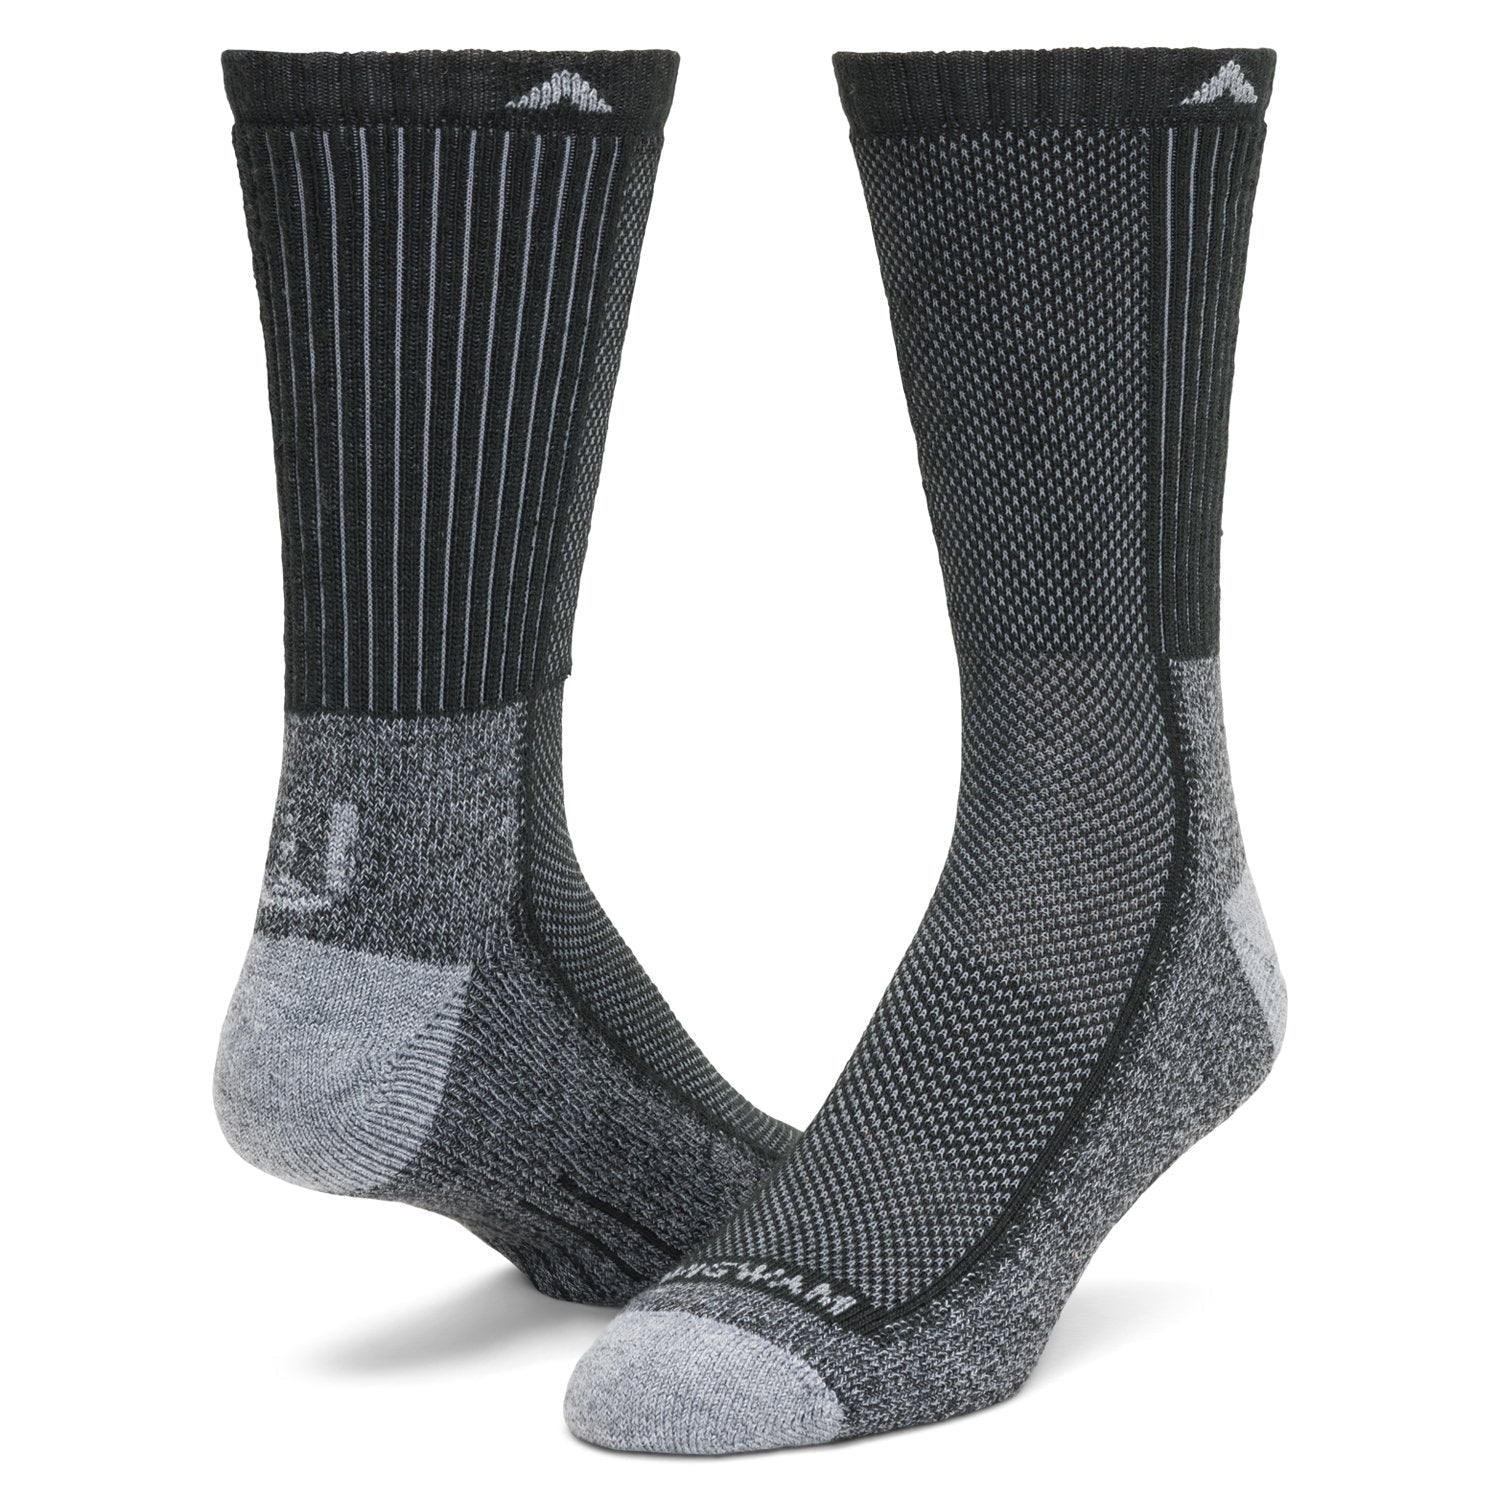 Cool-Lite Hiker Crew Midweight Sock - Black/Grey full product perspective - made in The USA Wigwam Socks